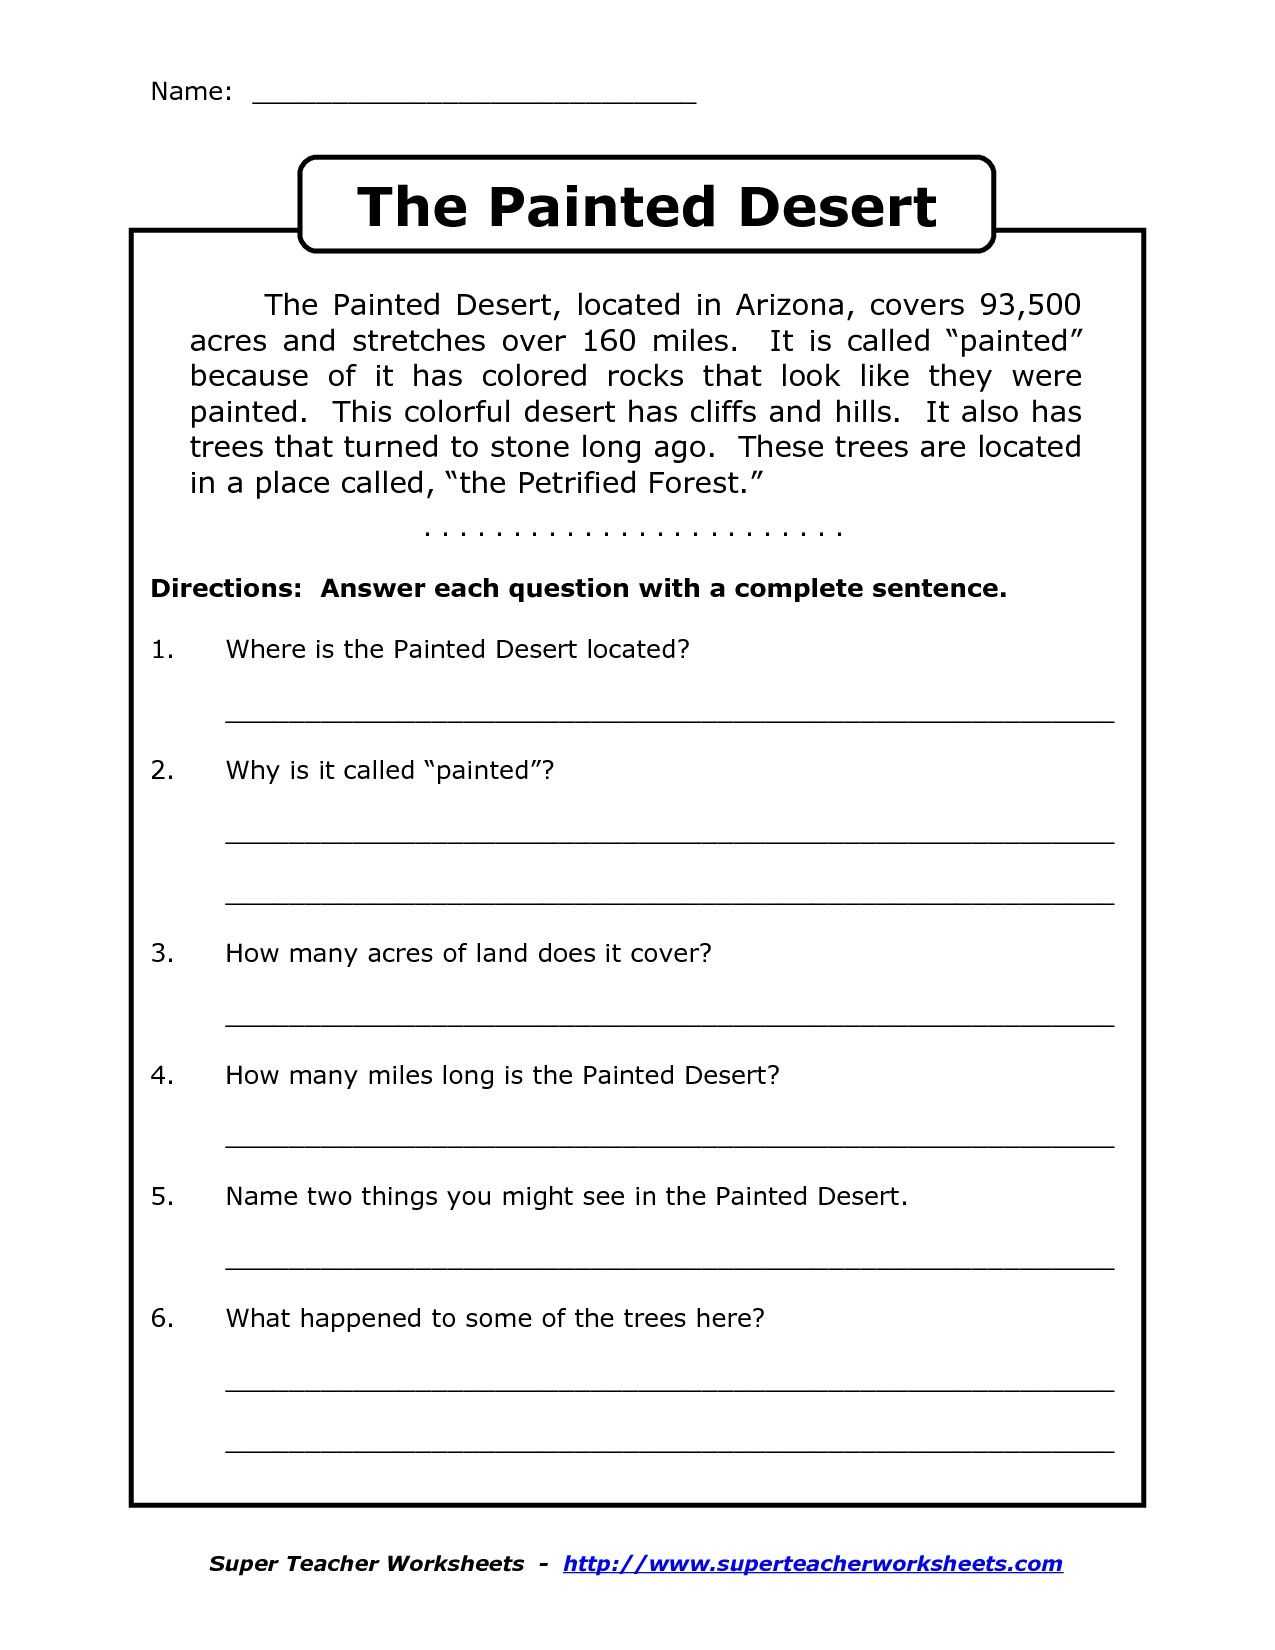 Reading Comprehension Main Idea Worksheets Along with Prehension Worksheet for 1st Grade Y2 P3 the Painted Desert